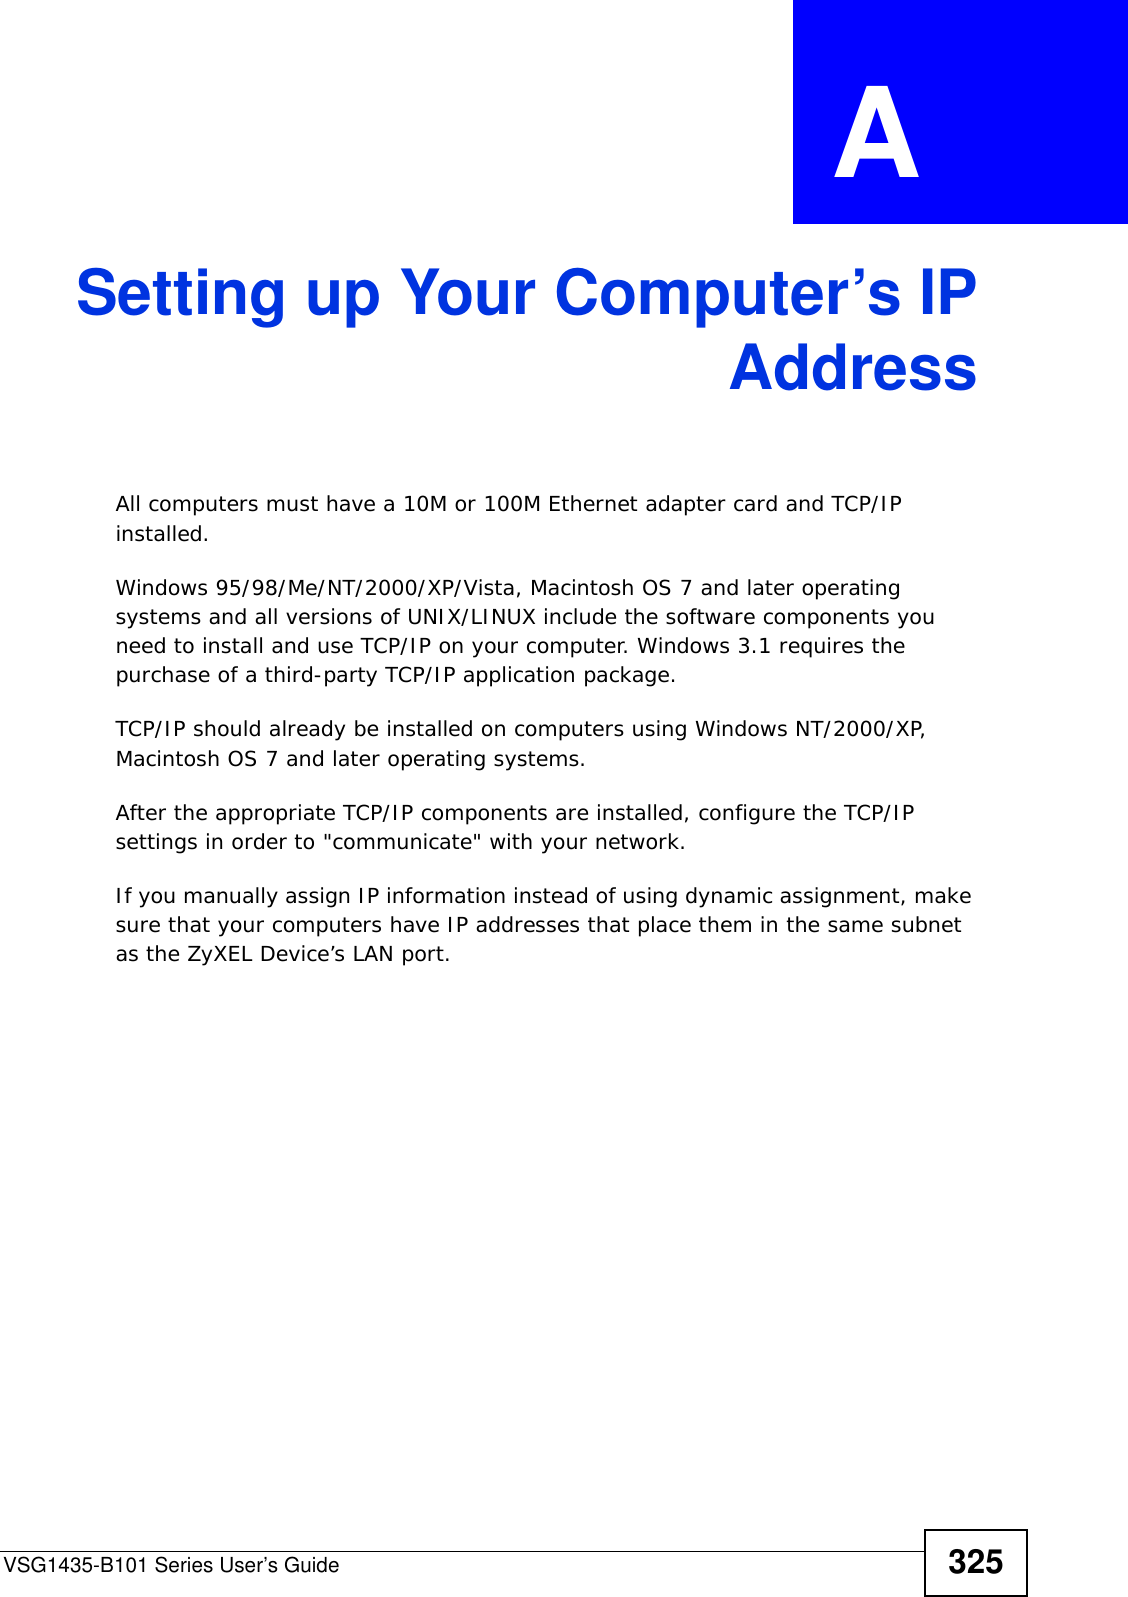 VSG1435-B101 Series User’s Guide 325APPENDIX  A Setting up Your Computer’s IPAddressAll computers must have a 10M or 100M Ethernet adapter card and TCP/IP installed. Windows 95/98/Me/NT/2000/XP/Vista, Macintosh OS 7 and later operating systems and all versions of UNIX/LINUX include the software components you need to install and use TCP/IP on your computer. Windows 3.1 requires the purchase of a third-party TCP/IP application package.TCP/IP should already be installed on computers using Windows NT/2000/XP, Macintosh OS 7 and later operating systems.After the appropriate TCP/IP components are installed, configure the TCP/IP settings in order to &quot;communicate&quot; with your network. If you manually assign IP information instead of using dynamic assignment, make sure that your computers have IP addresses that place them in the same subnet as the ZyXEL Device’s LAN port.